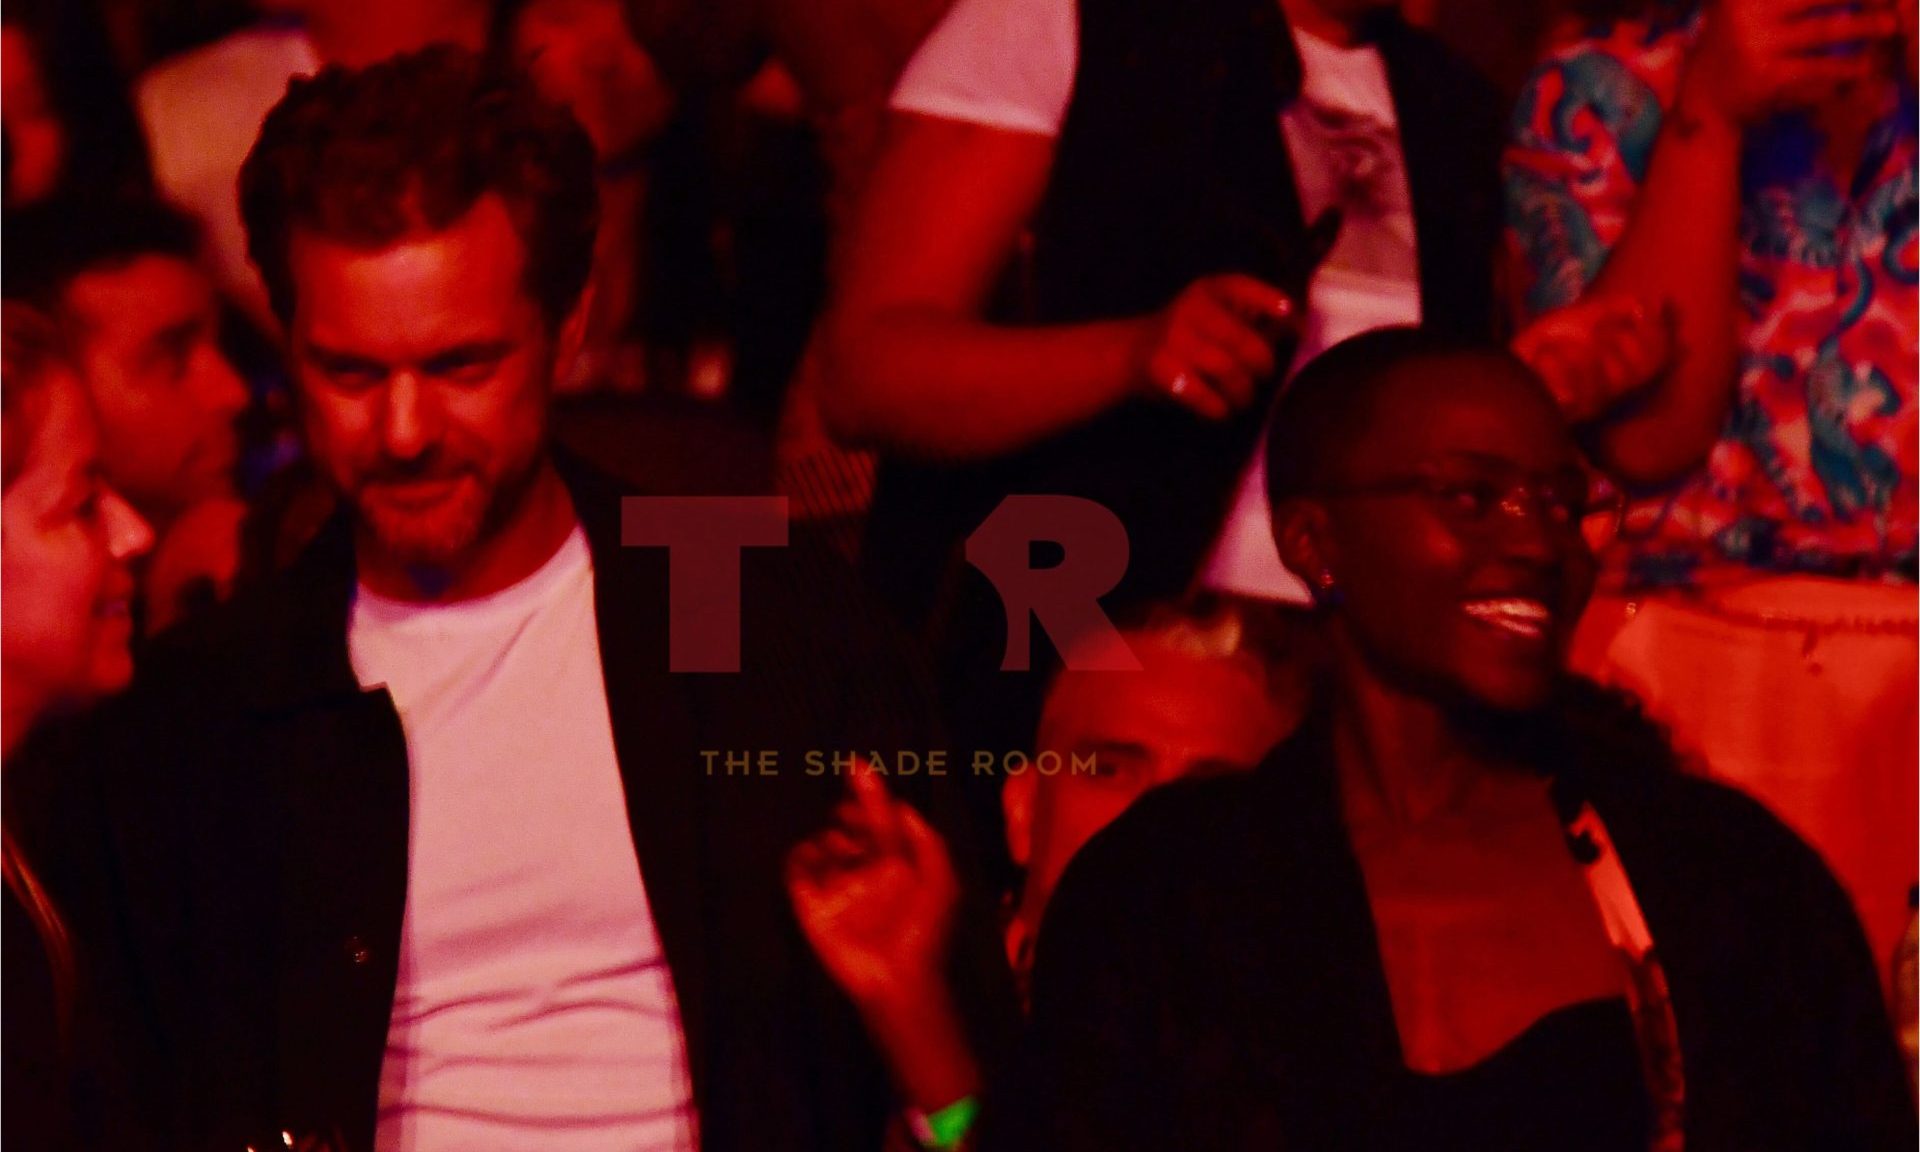 Actors Night Out! Joshua Jackson & Lupita Nyoung'o Enjoy Janelle Monáe's Concert With Friends (Exclusive)